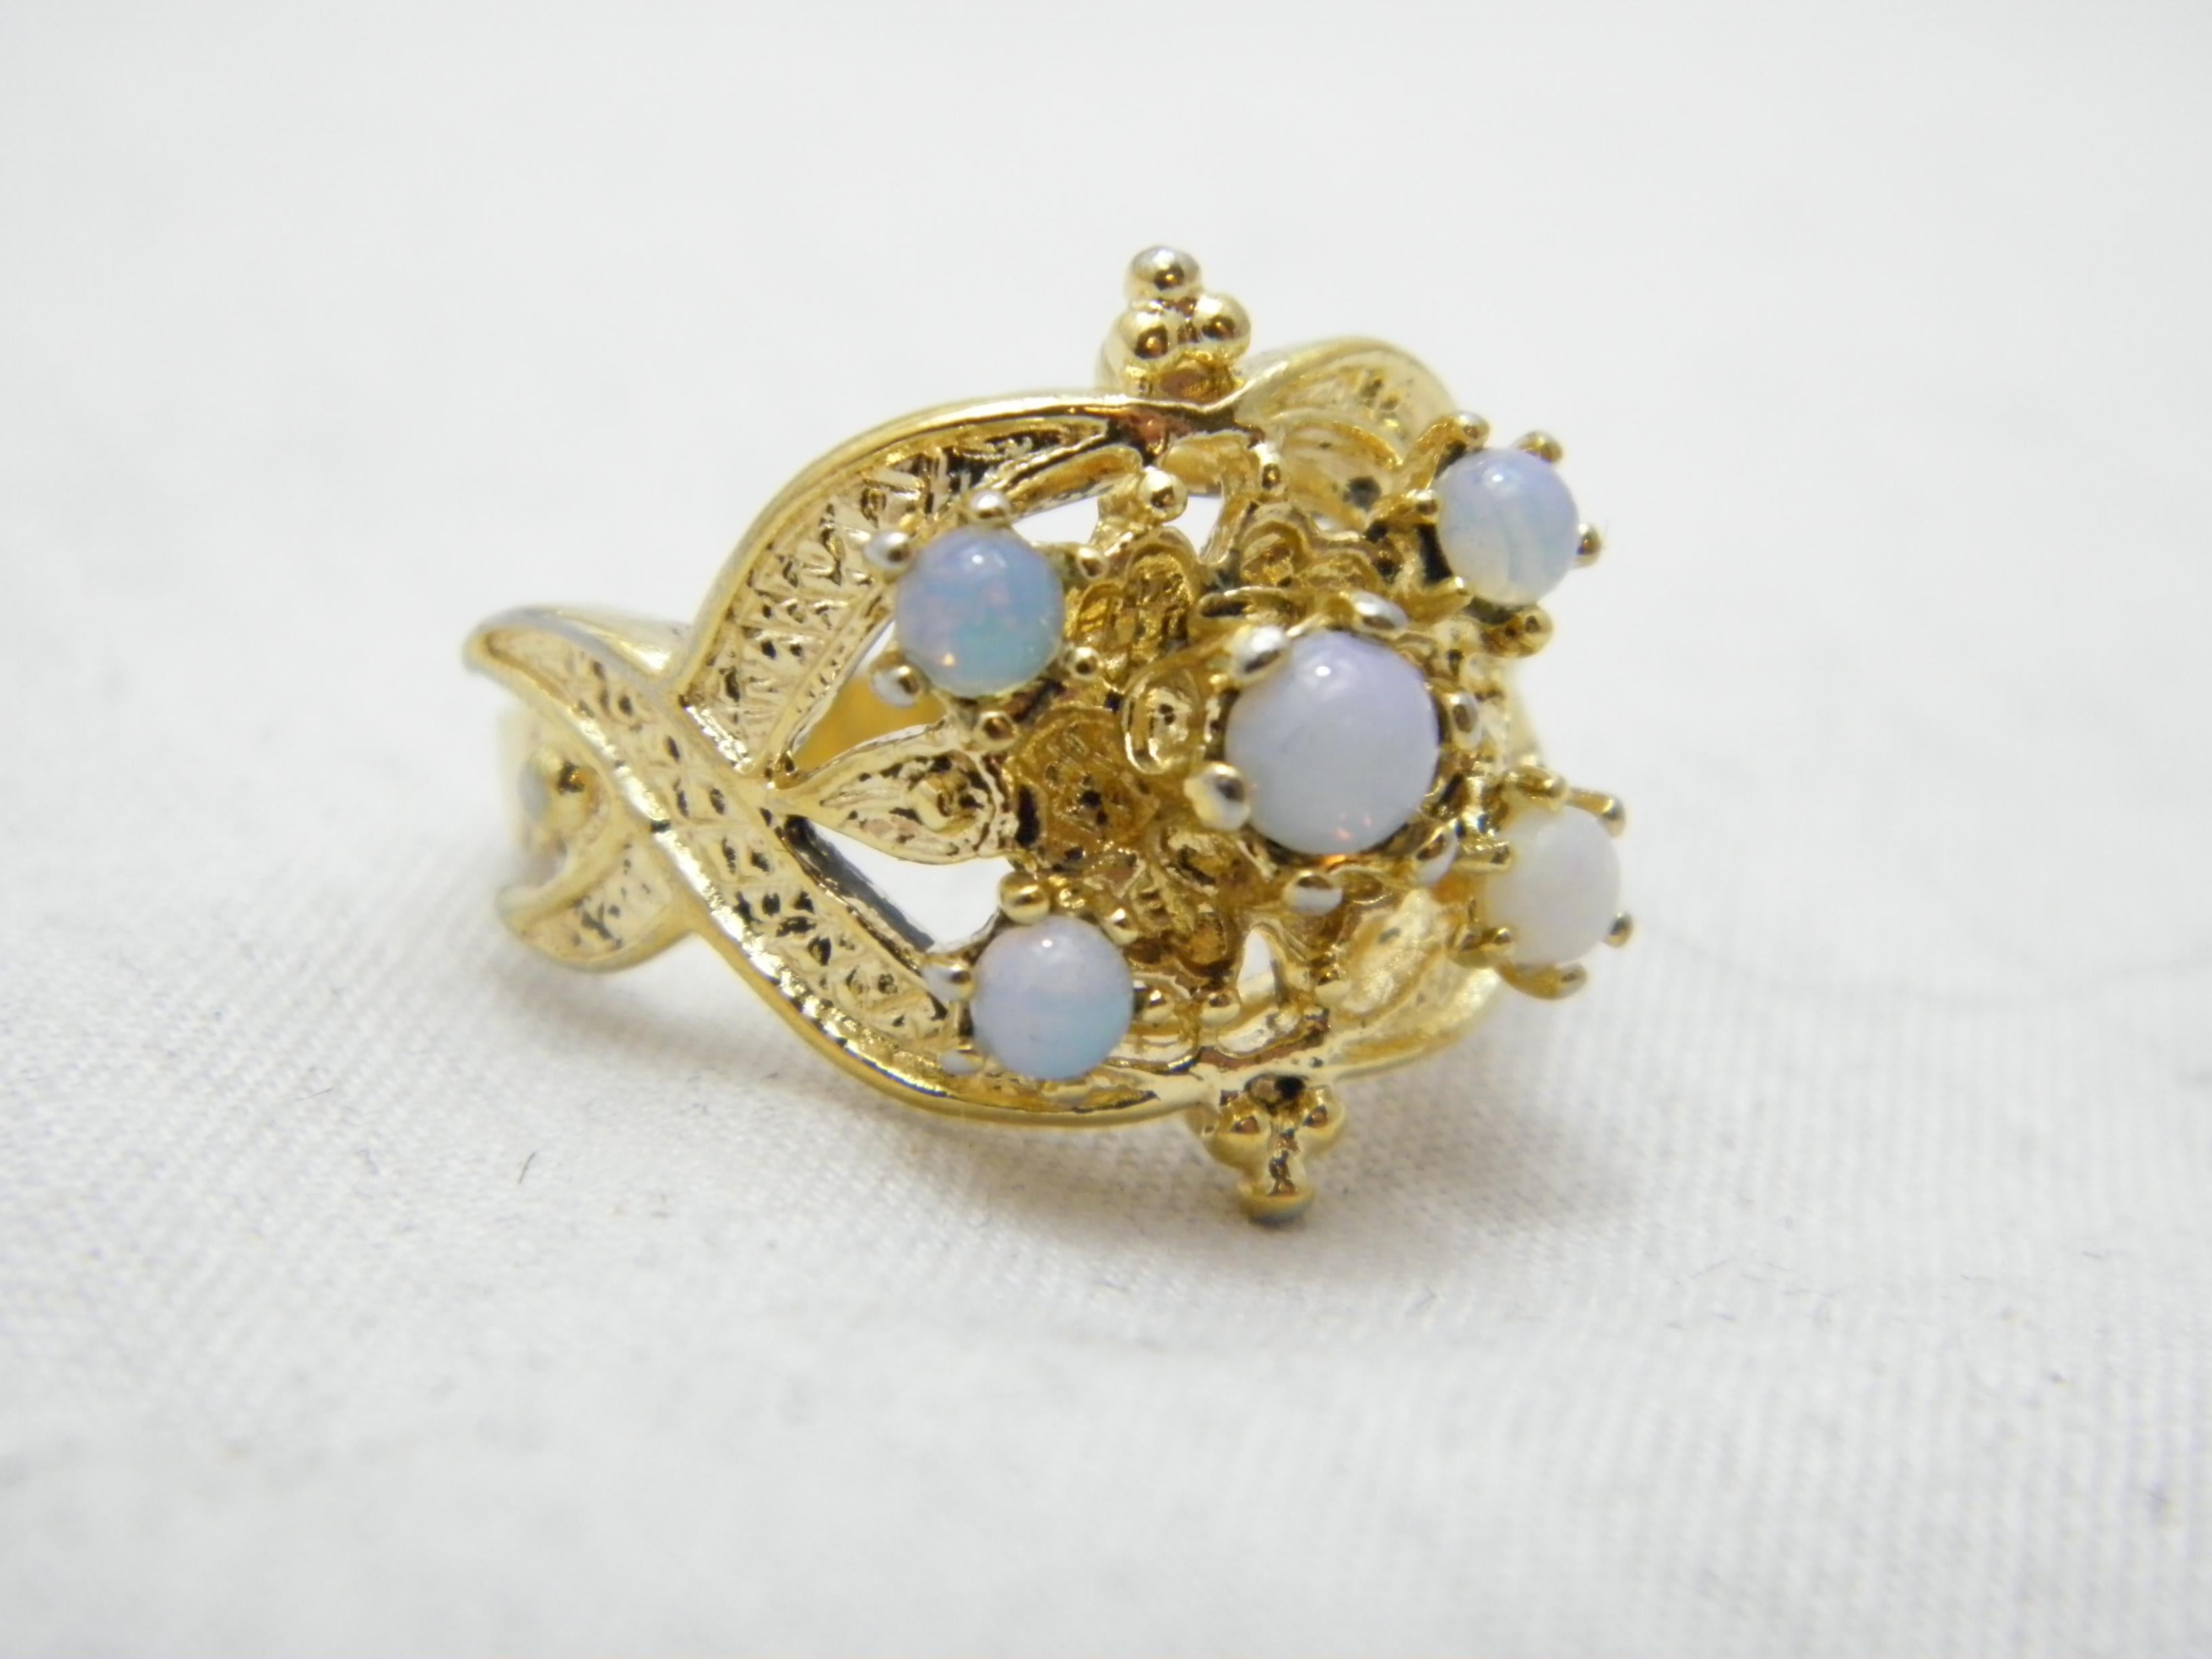 Victorian Vintage 14ct Gold Opal Signet Keeper Ring M 6.25 585 Purity Coober Pedy Heavy For Sale